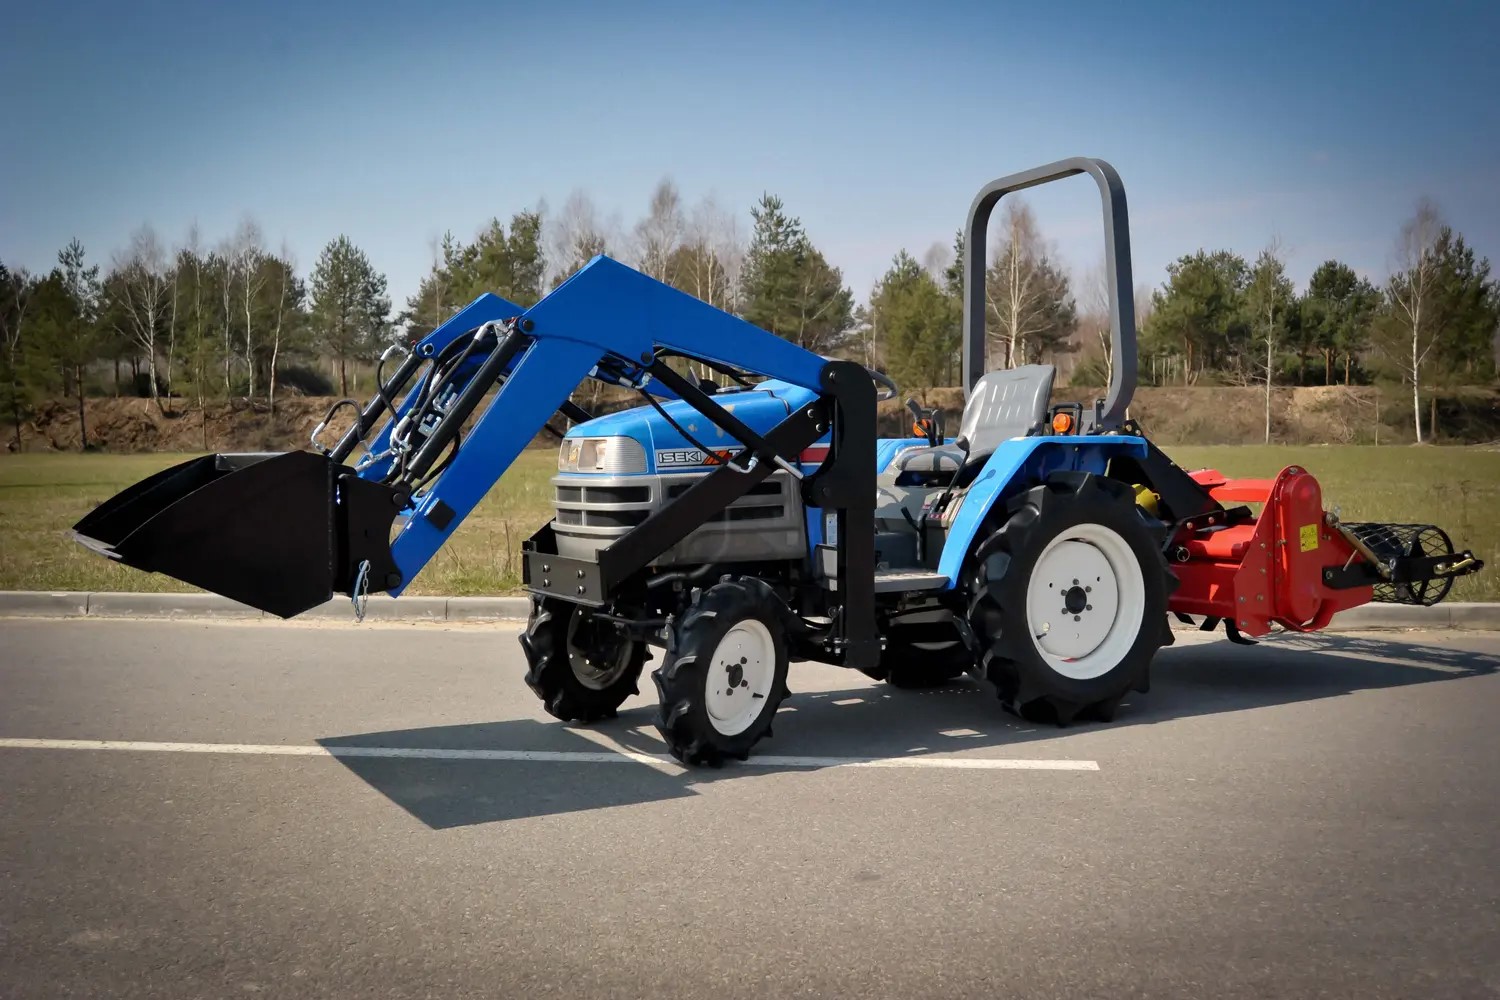 Our next implementation is the Iseki TM17, a TUR front loader and a separation tiller